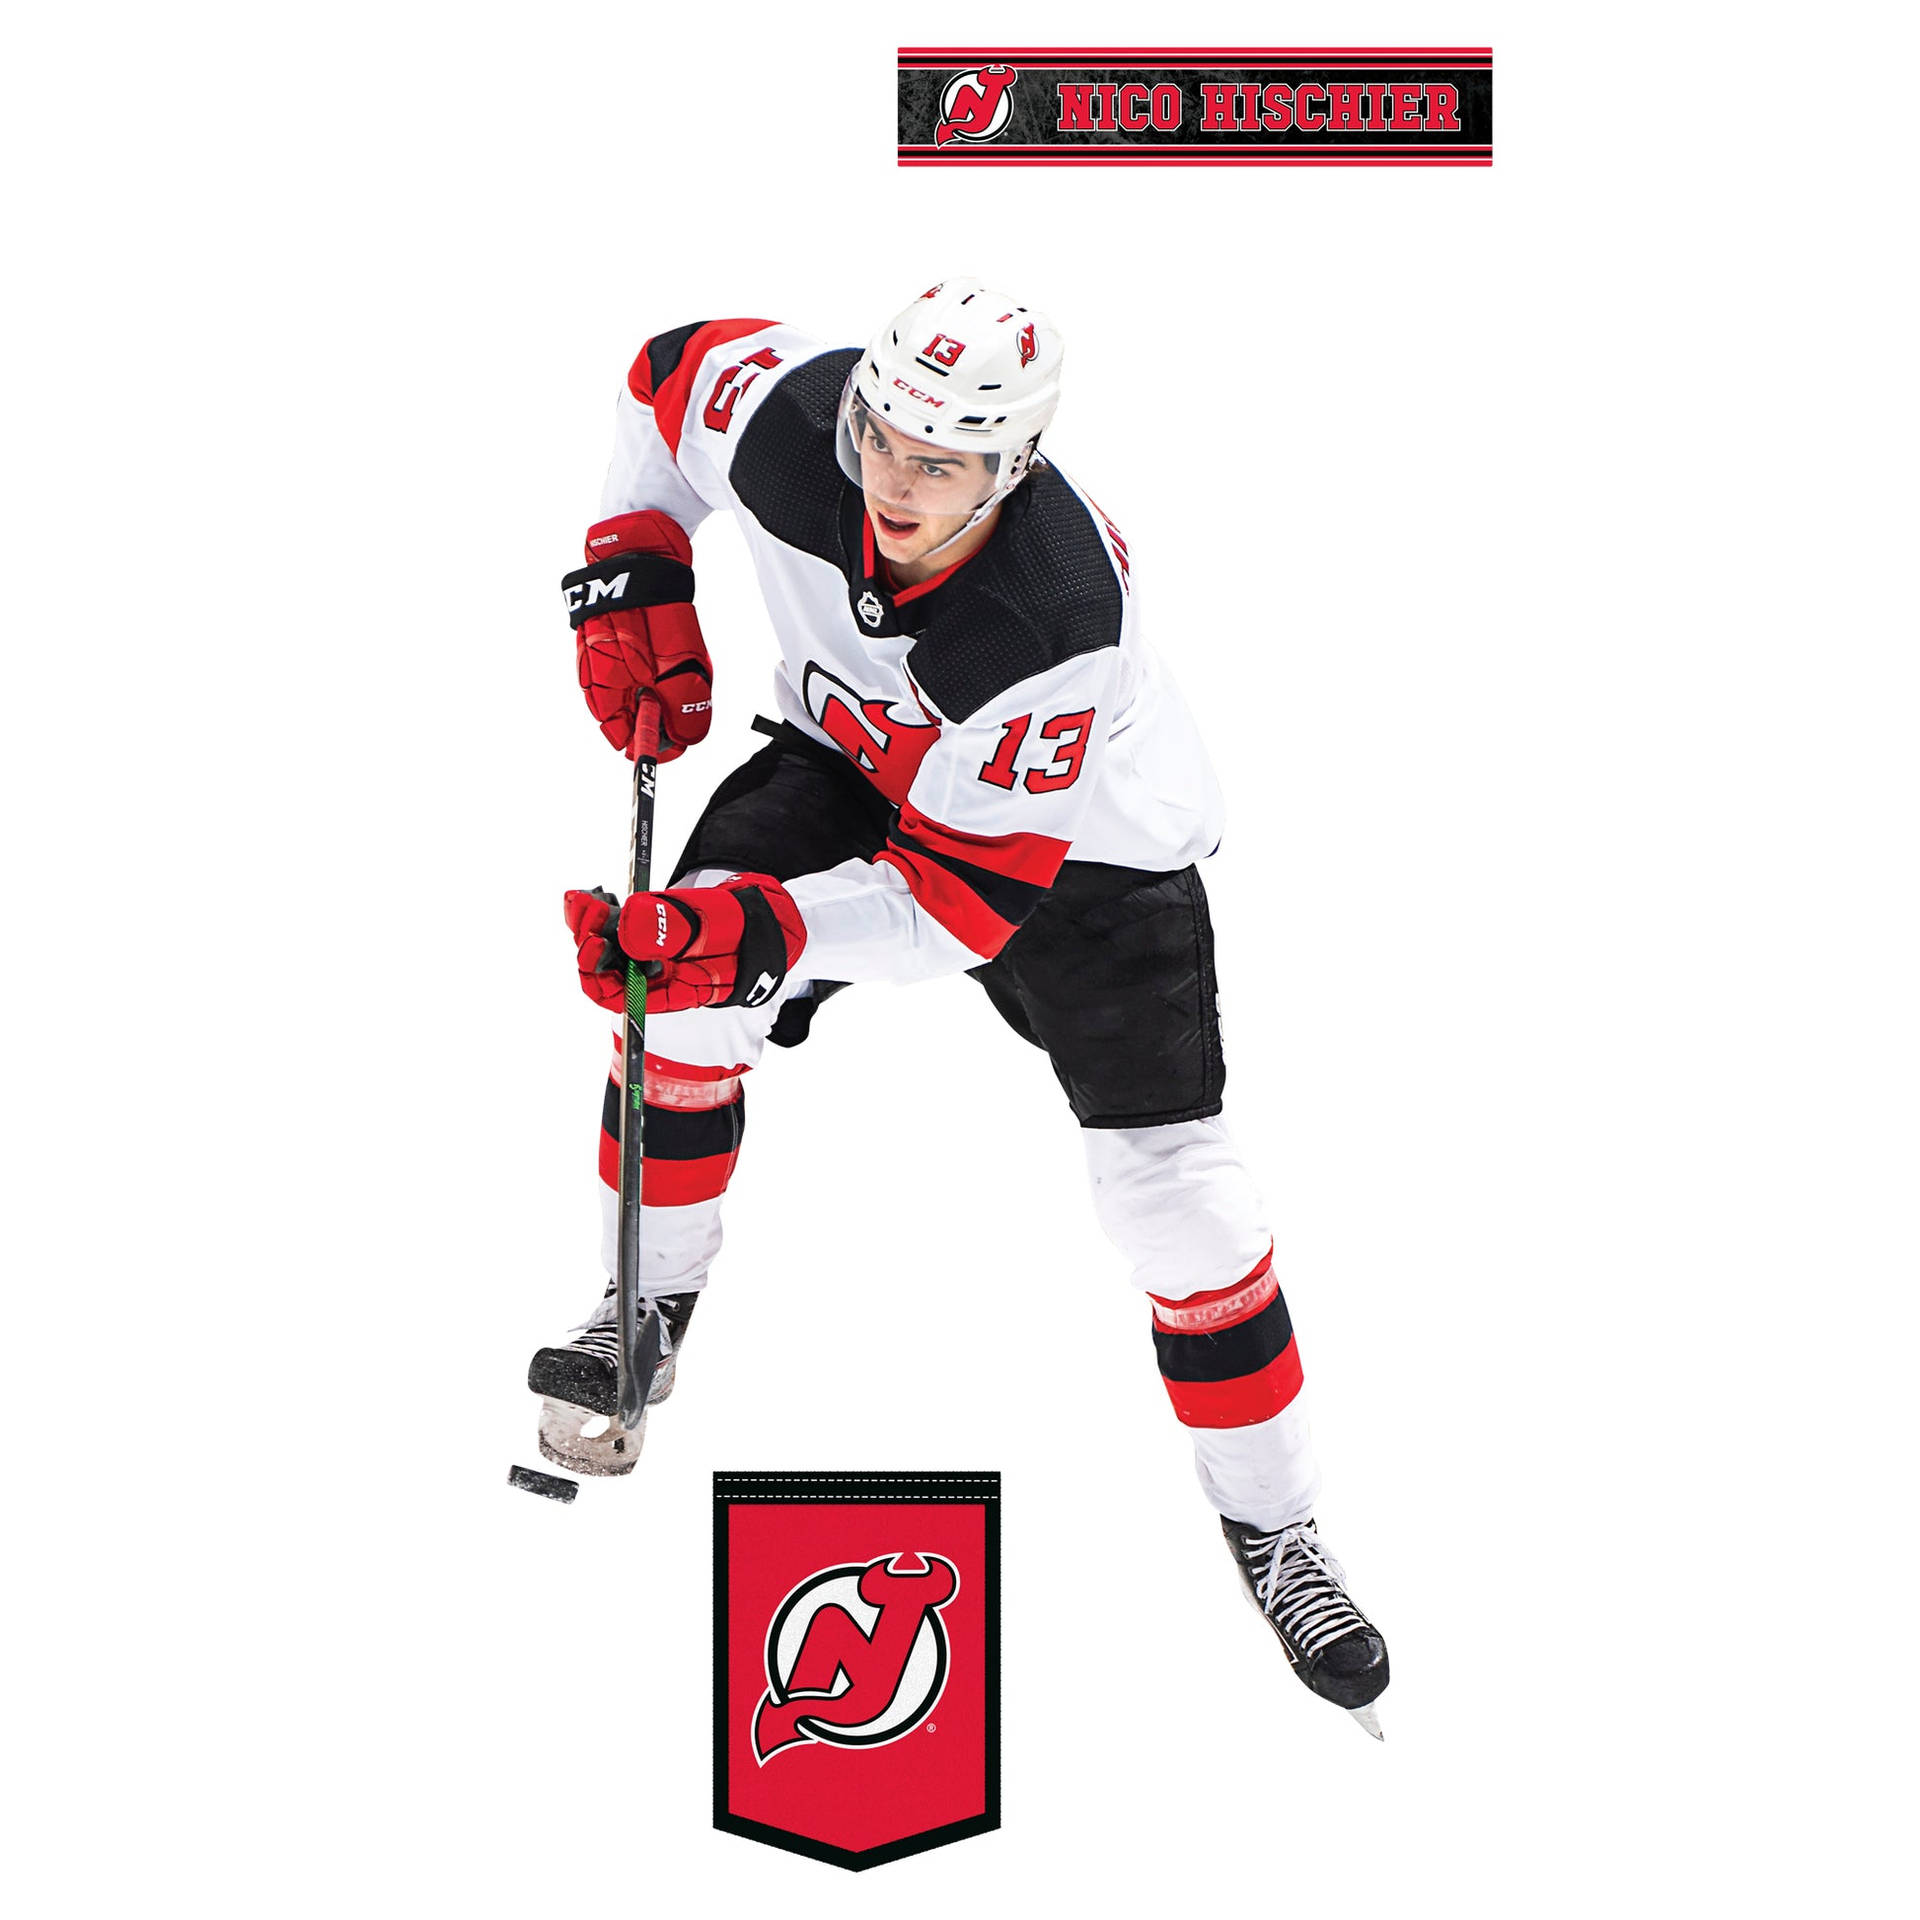 New Jersey Devils: The bar is set for Nico Hischier in 2019